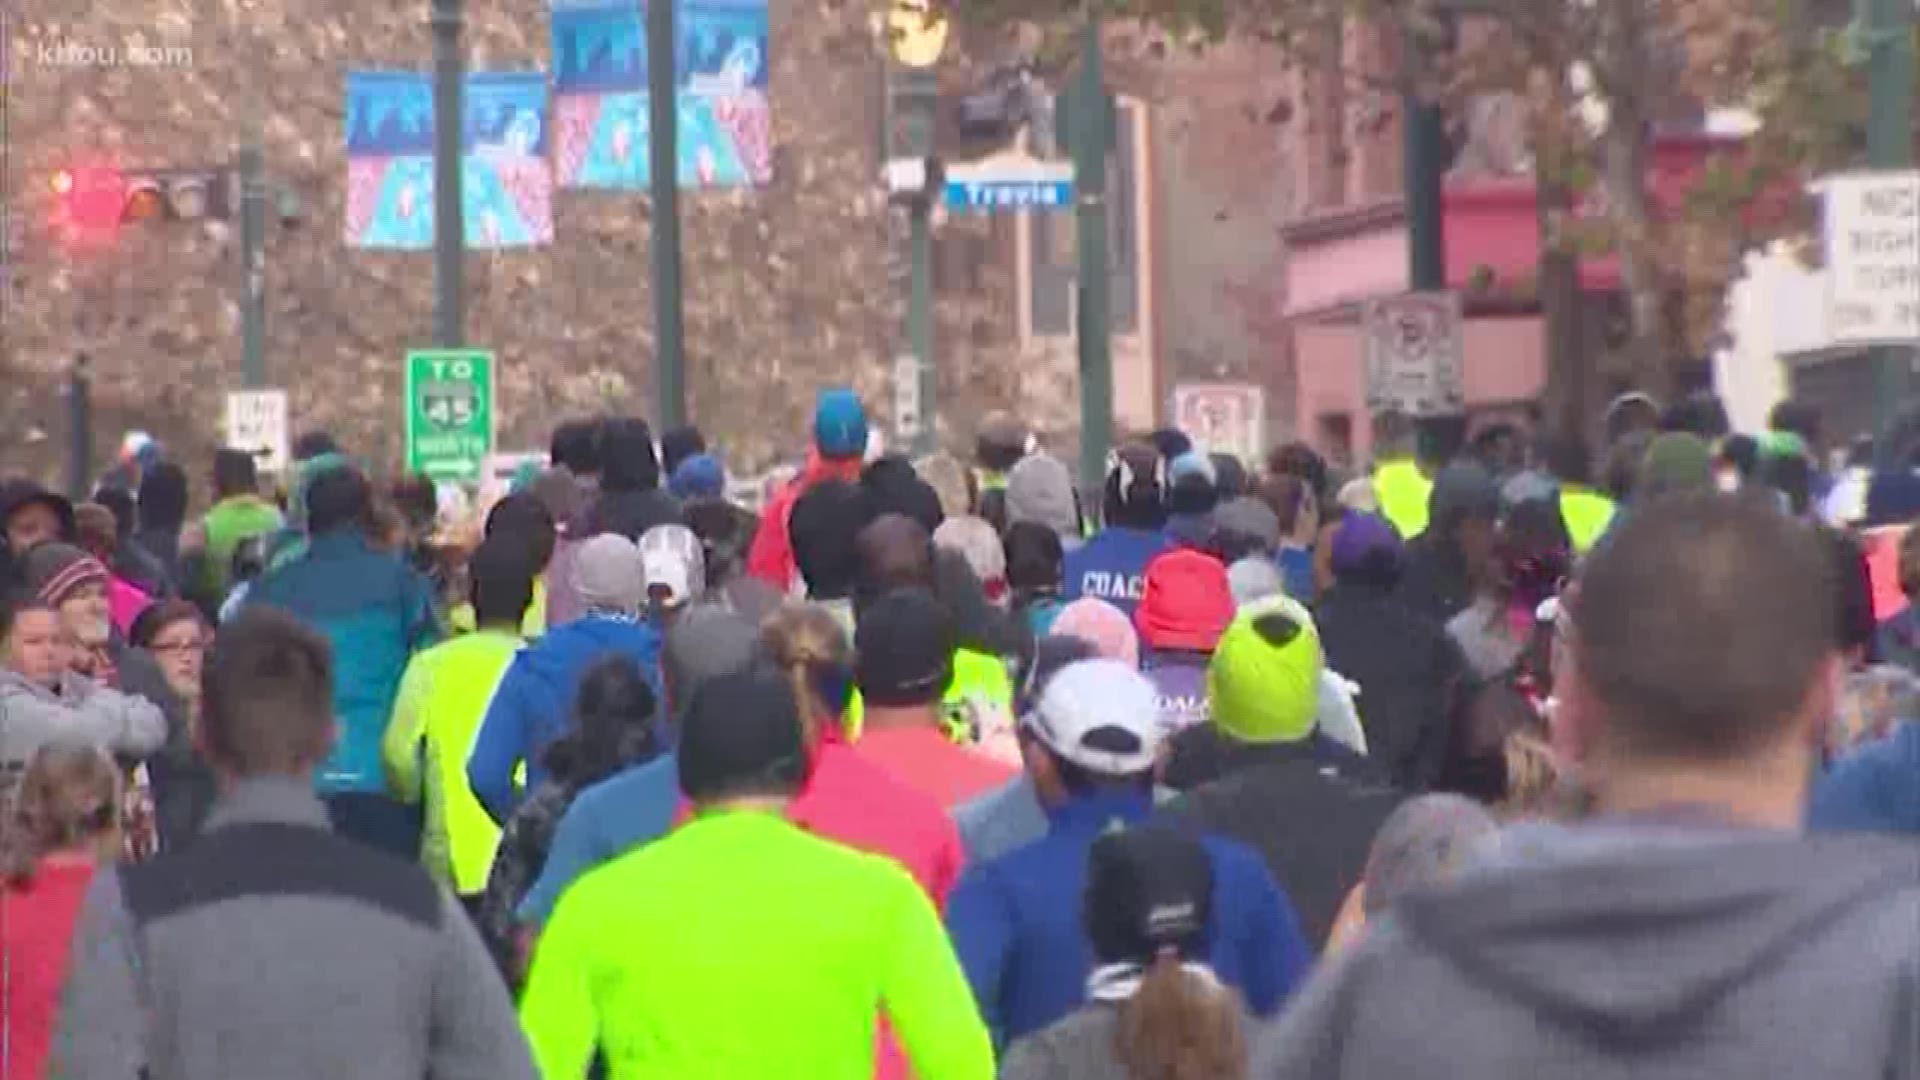 Thousands of runners are expected to participate in a grueling marathon in Houston.